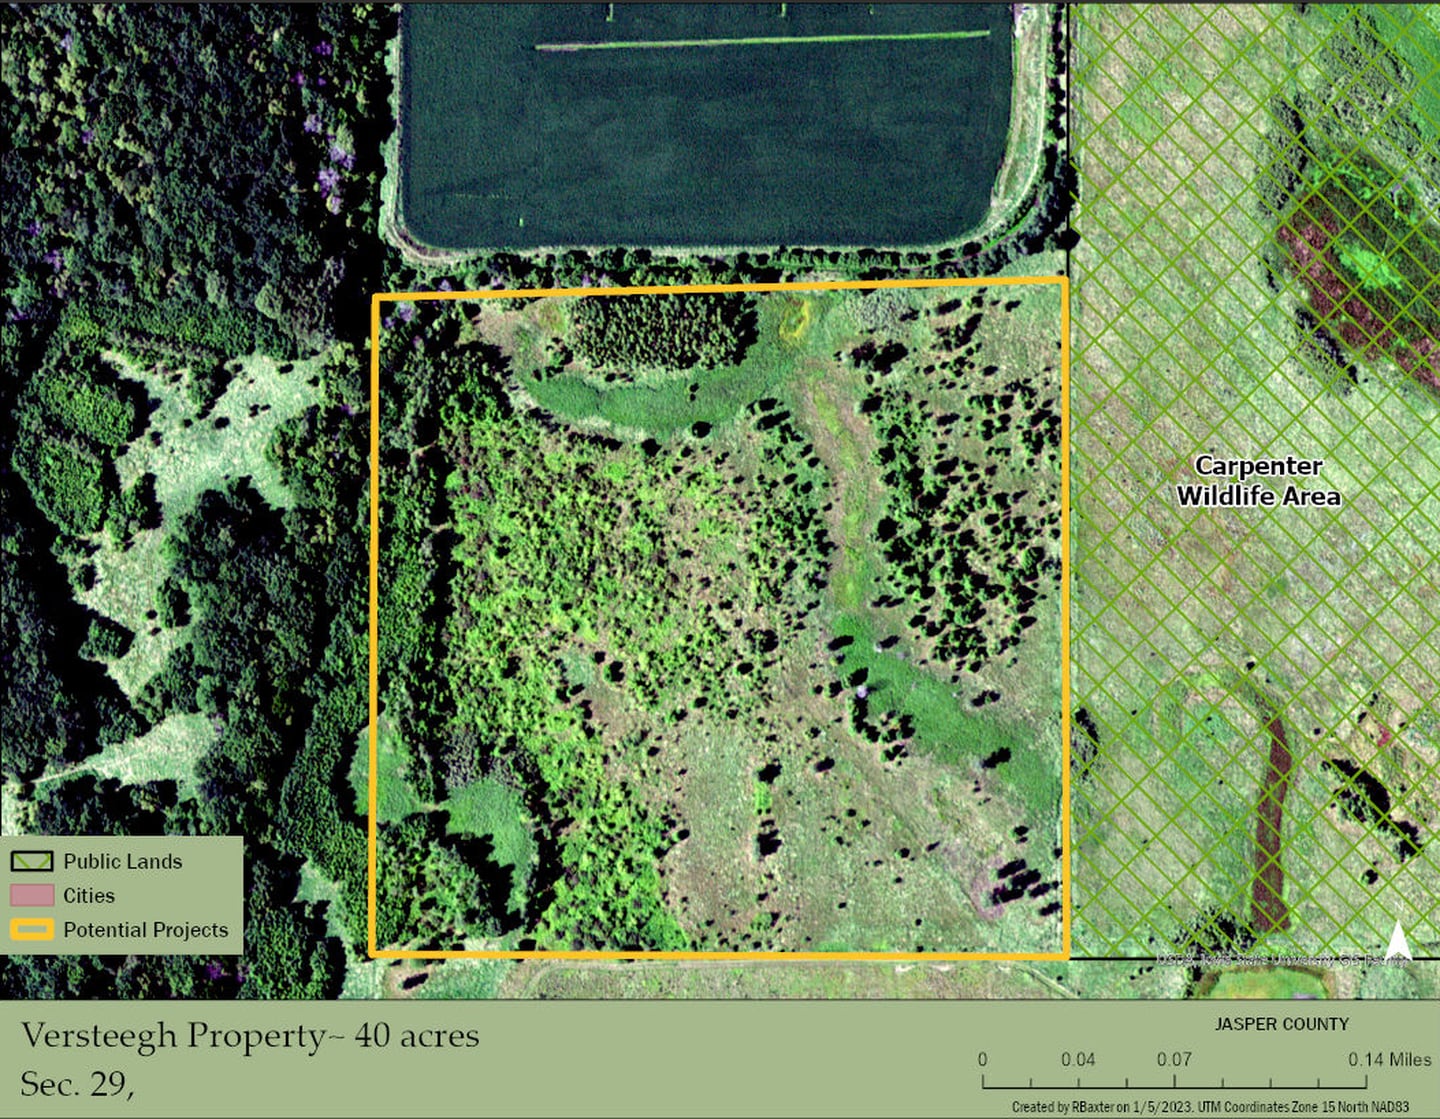 Jasper County Conservation obtained a 40-acre property south of Reasnor that will be used for public hunting. The acquisition of the property was possible in part due to donations from local Pheasants Forever groups.